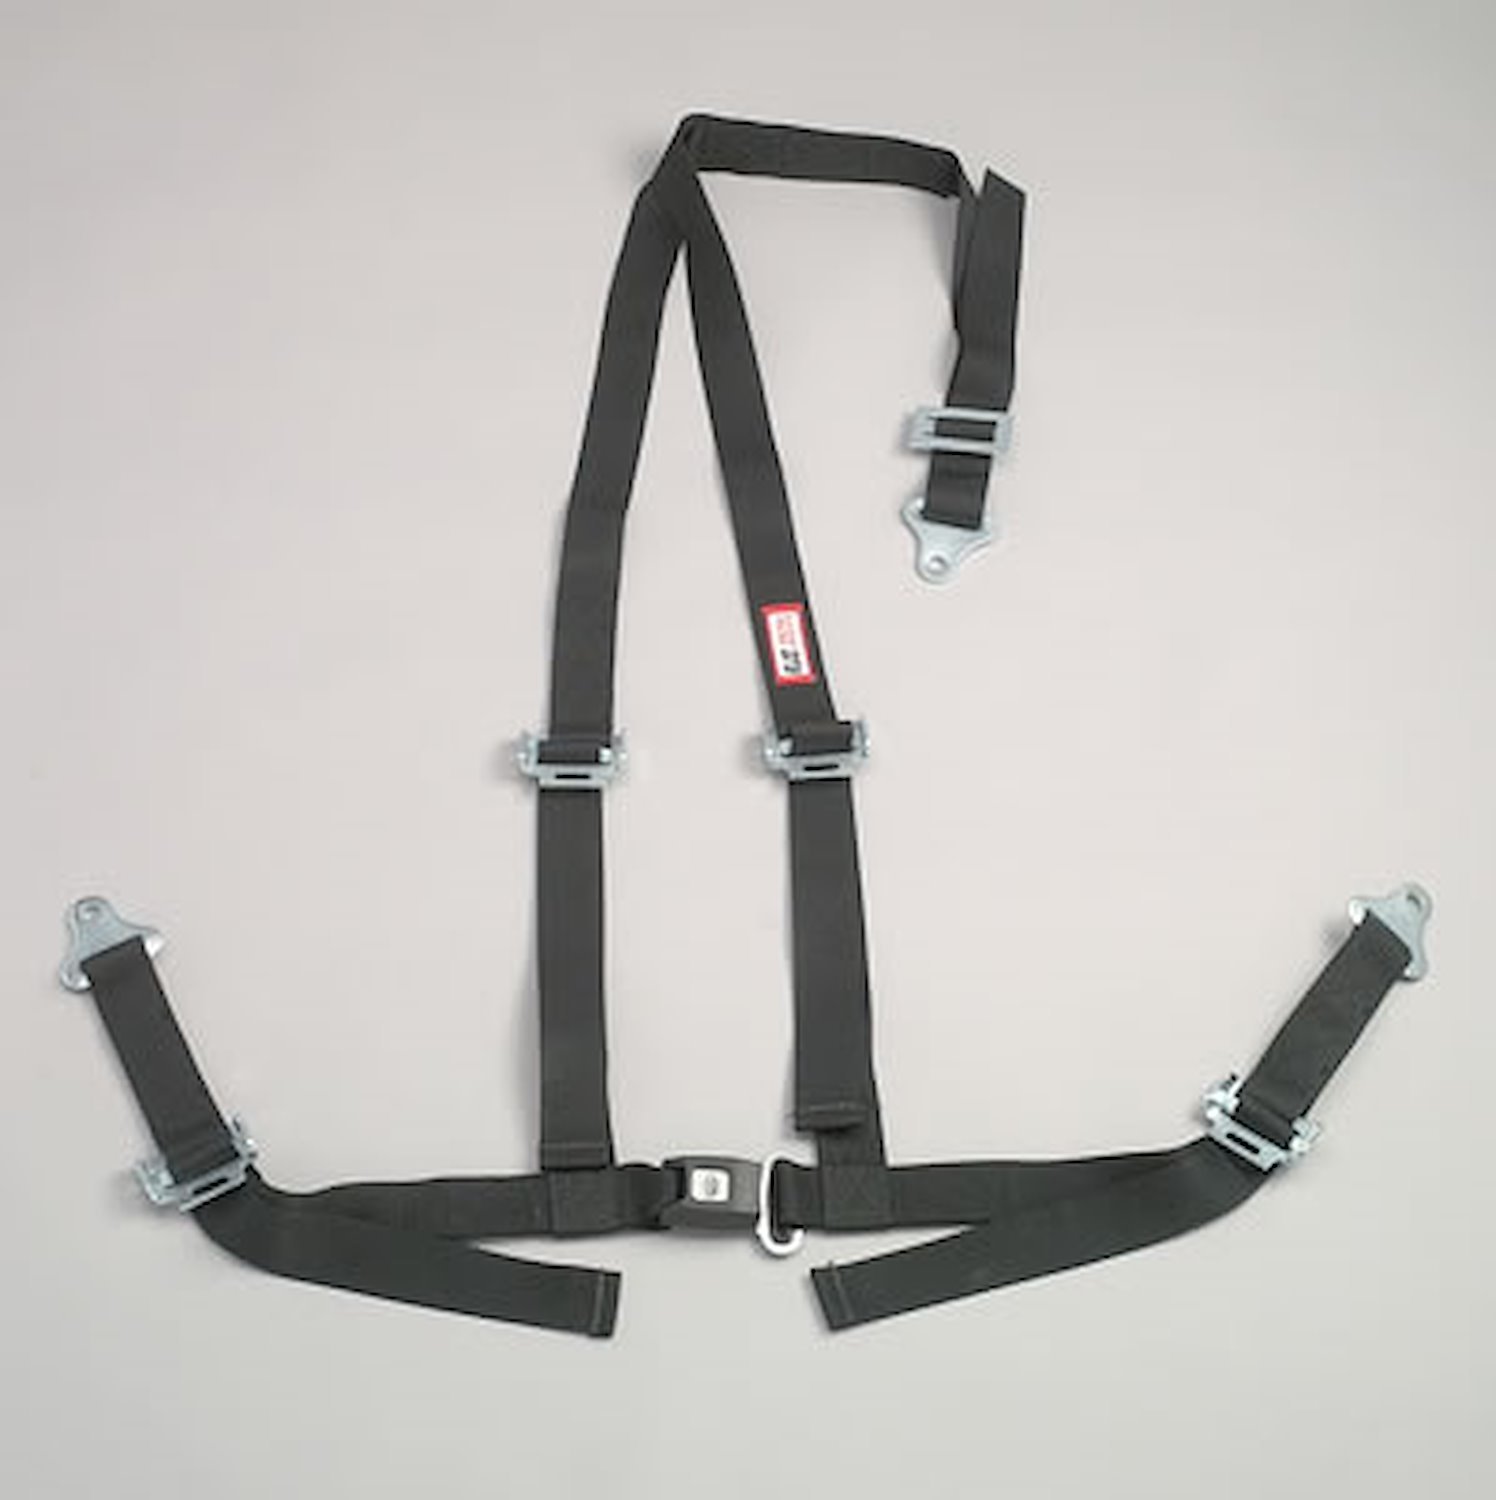 NON-SFI B&T HARNESS 2 PULL DOWN Lap Belt SNAP 2 S.H. INDIVIDUAL FLOOR Mount WRAP/SNAP GRAY